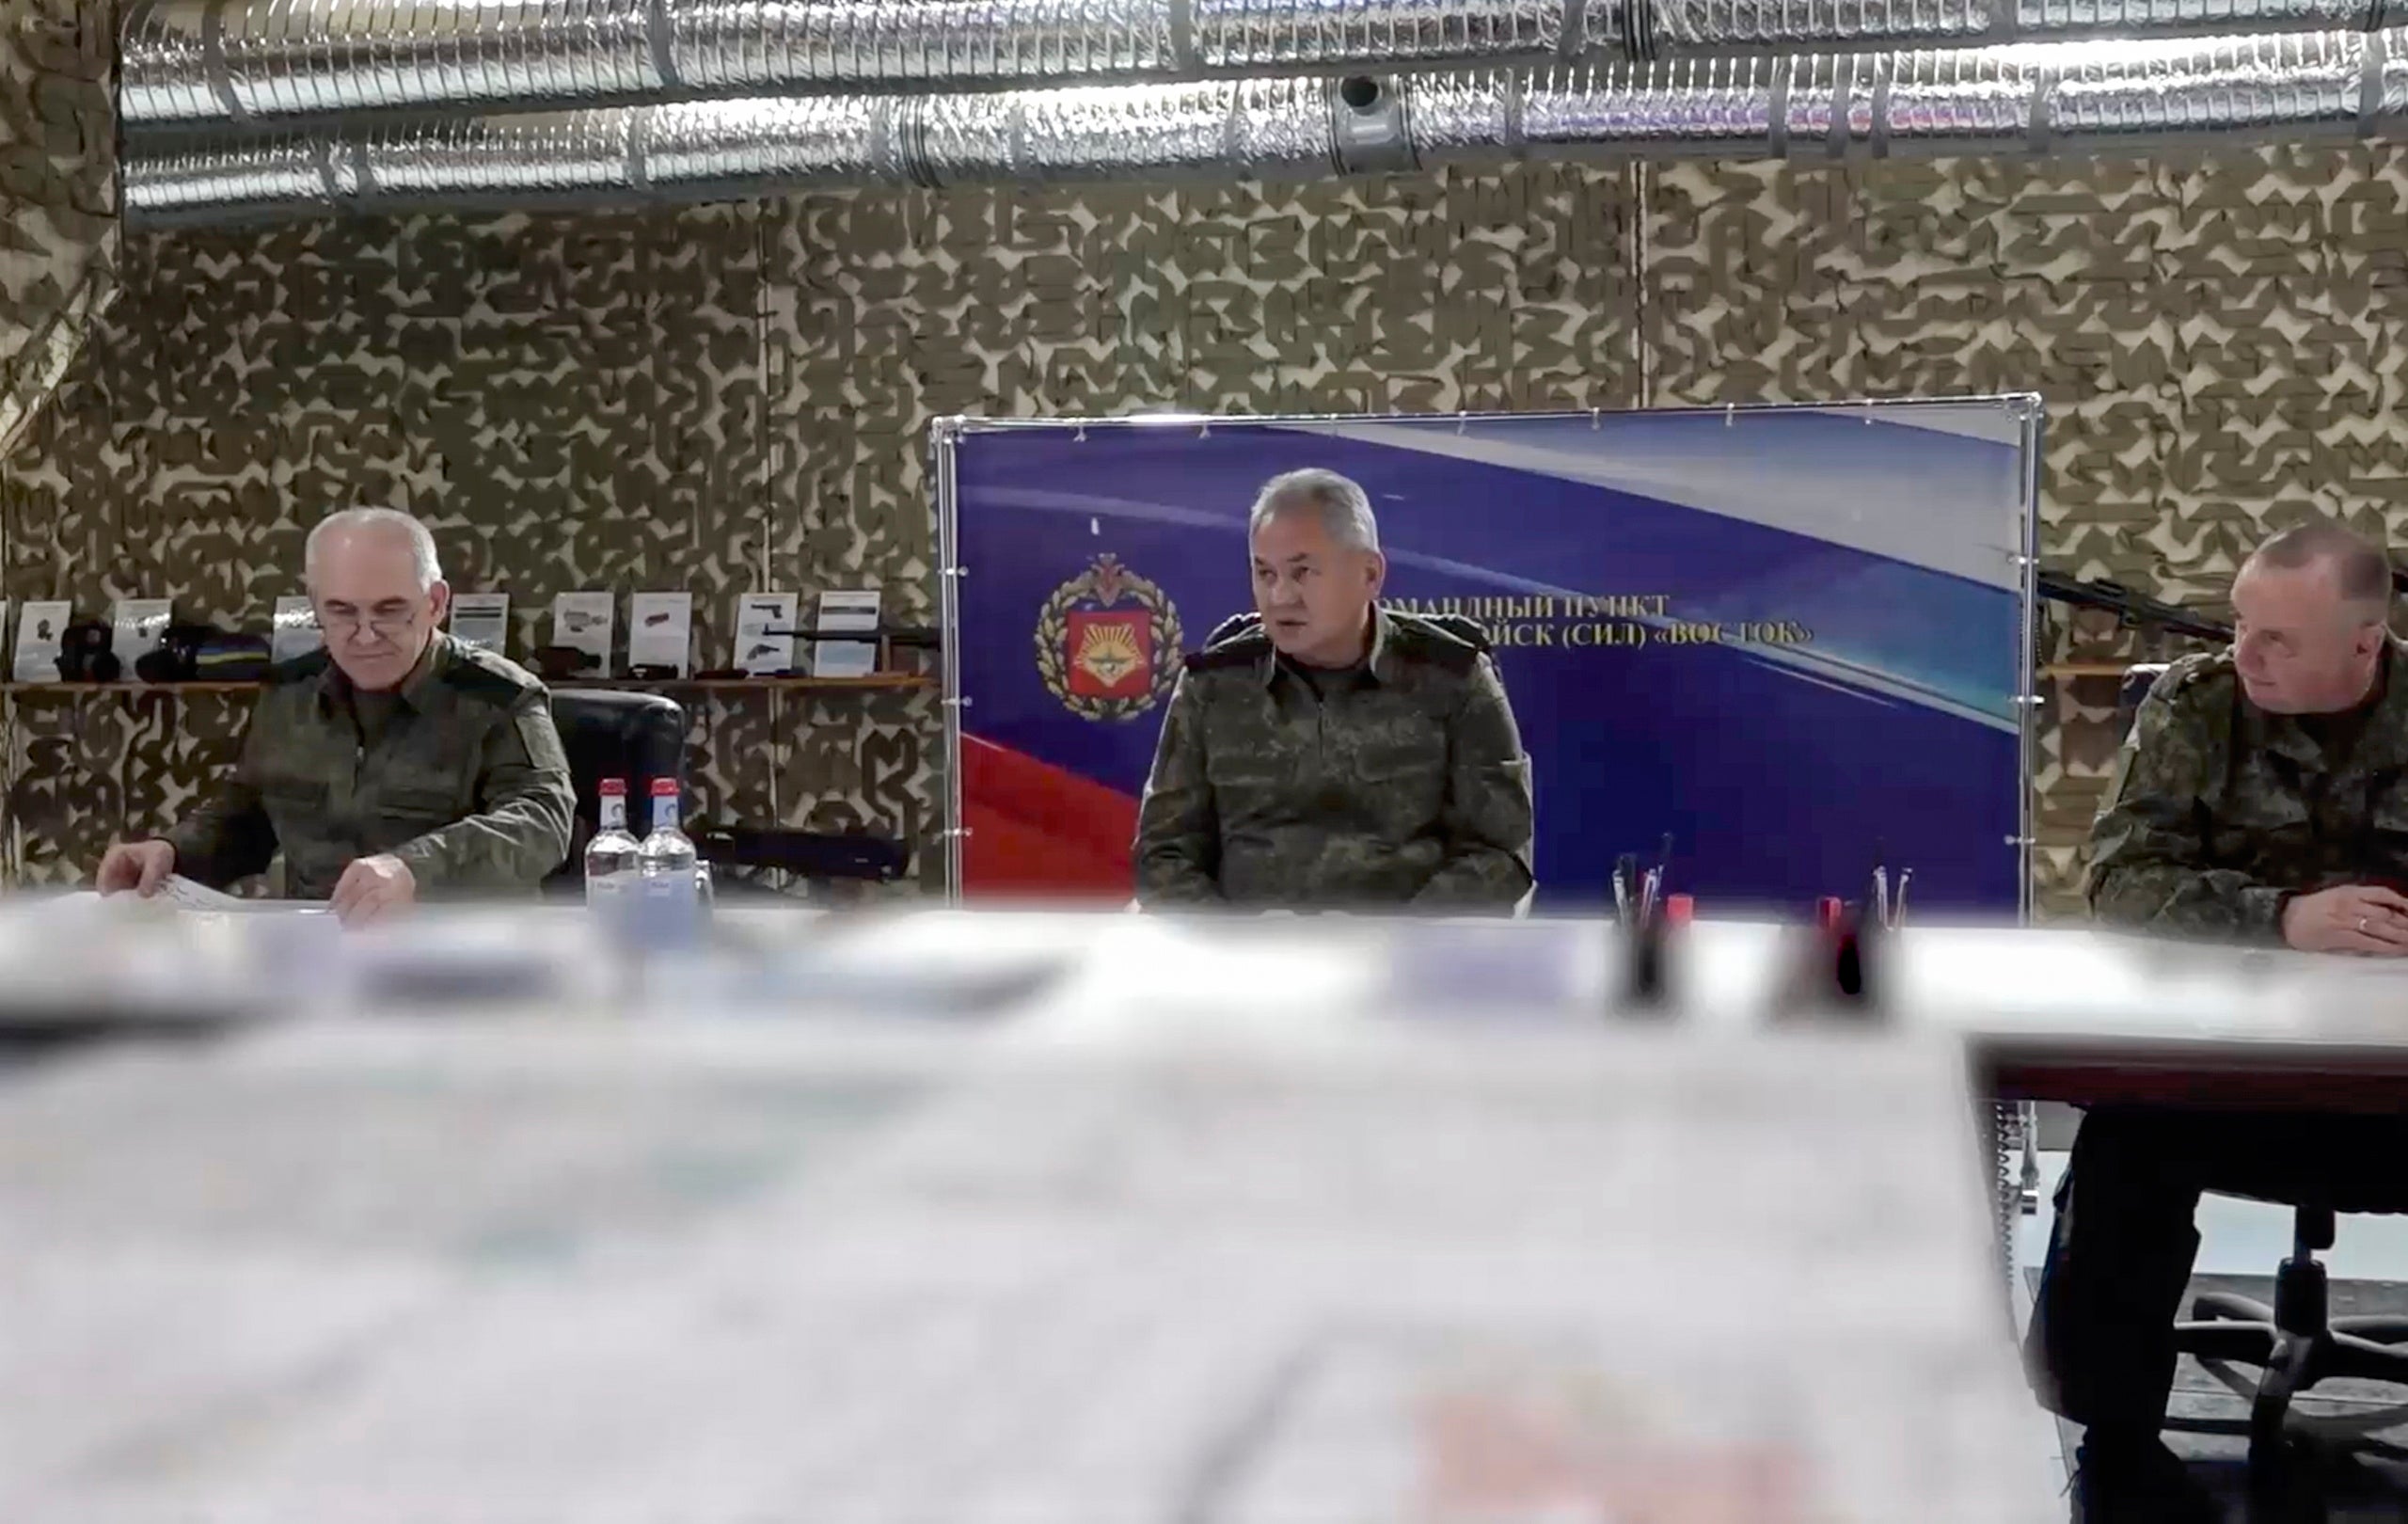 Russian defence minister Sergei Shoigu (centre) inspecting the forward command post of the ‘Vostok’ (East) group of troops at an undisclosed location in Ukraine